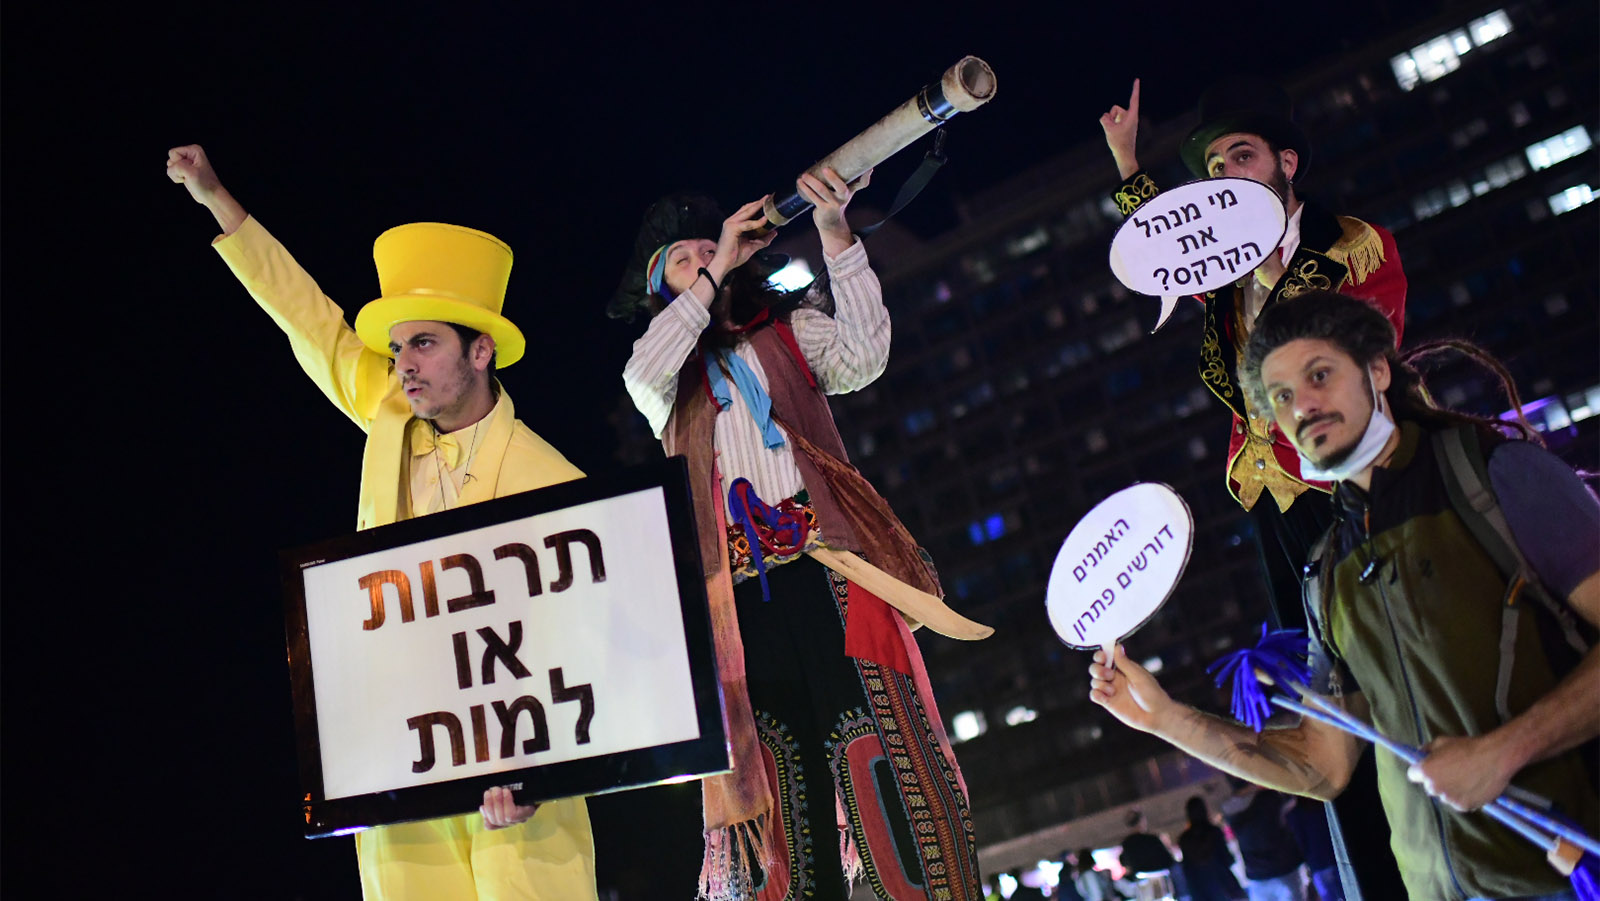 Artists and organizers protesting the shutdown of the sphere of events and culture, in Rabin Square in Tel Aviv. April 23 2020. (Photograph: Tomer newburg/Flash90)